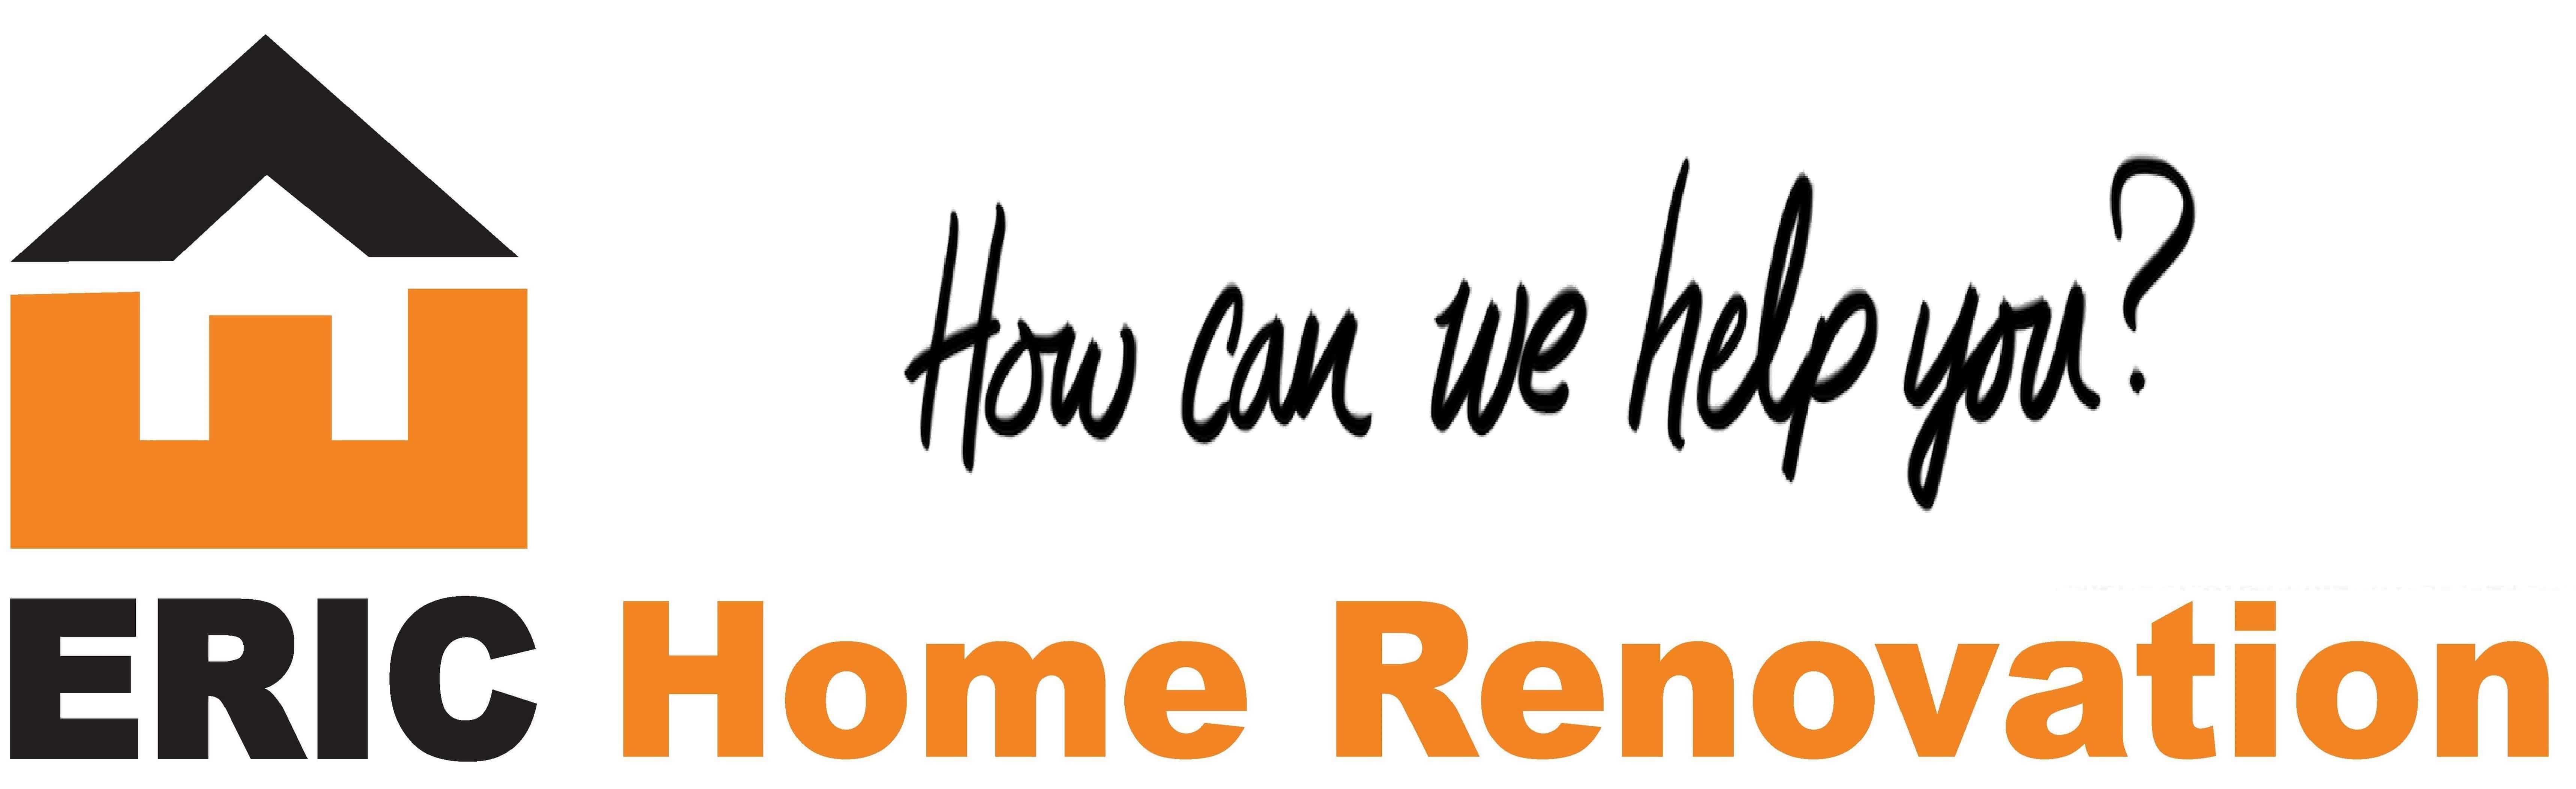 How can we help you - Eric Home Renovation